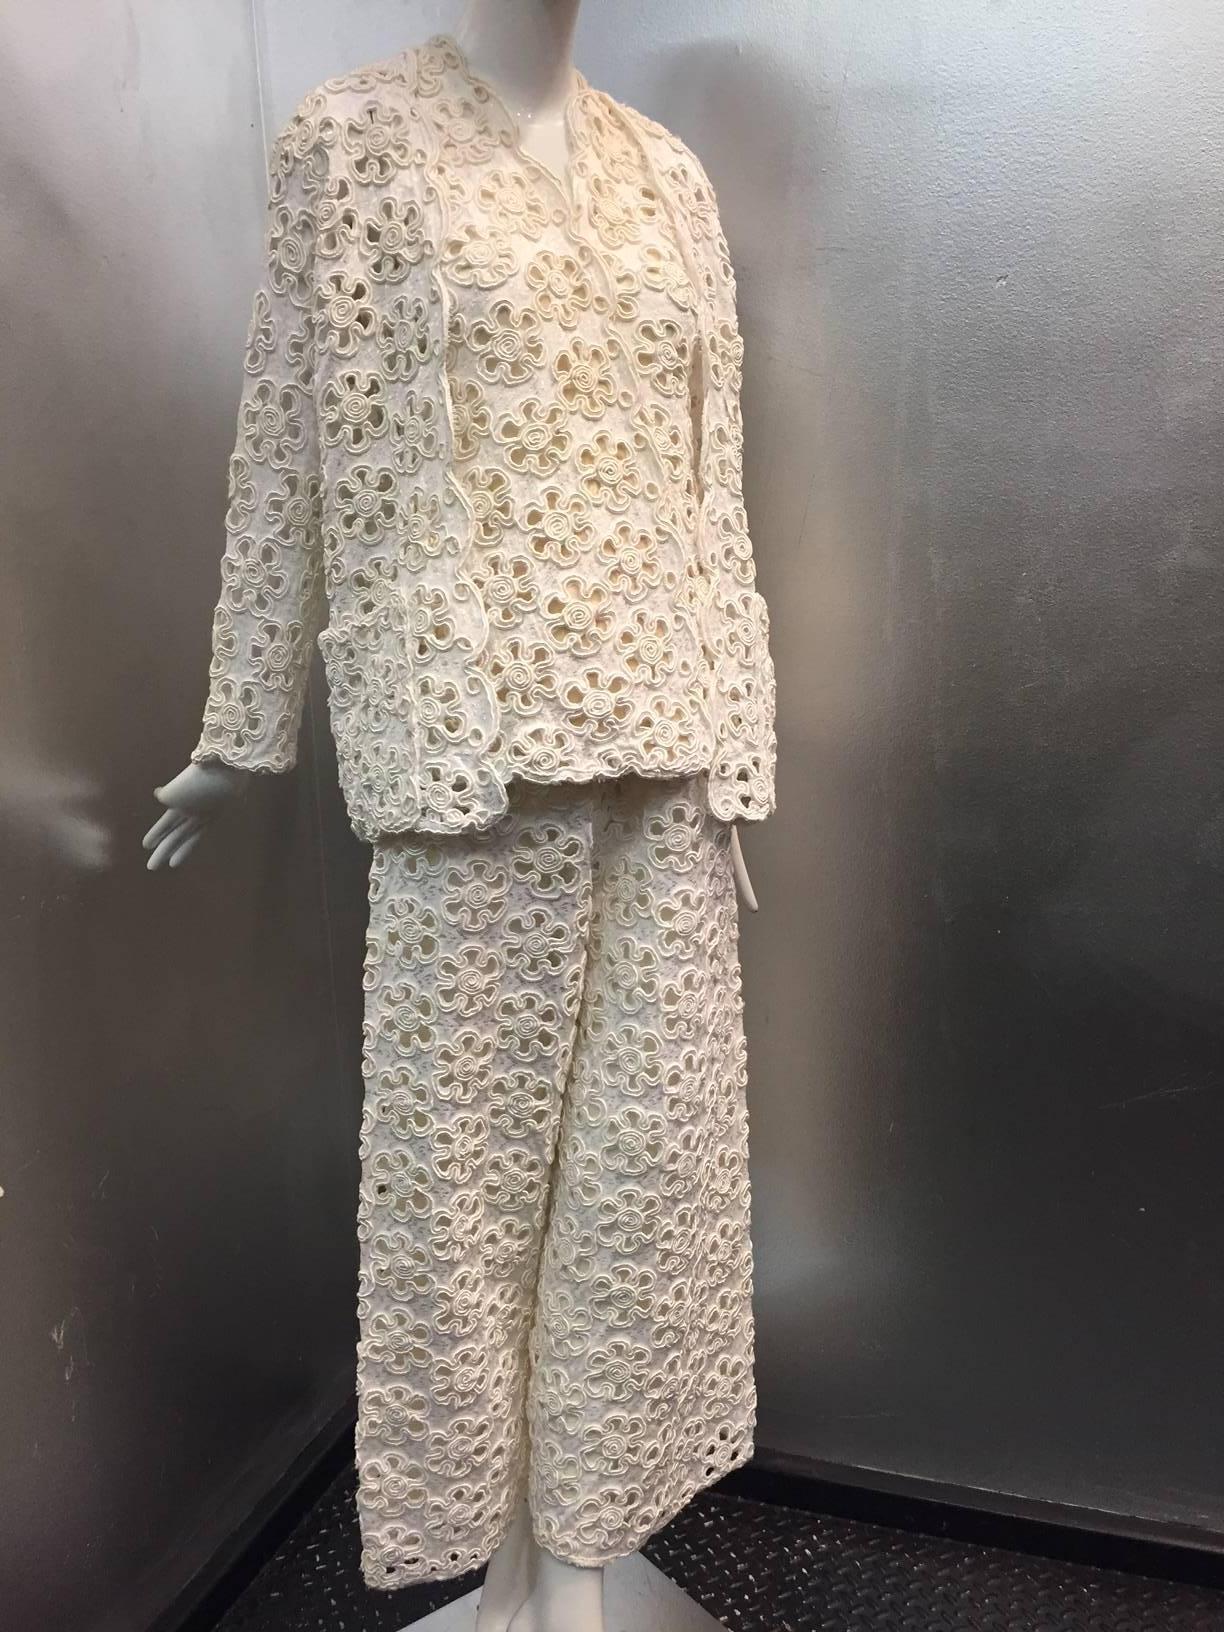 A fabulous 1960s James Galanos Mod style cream embroidered lace 3-piece pant suit.  Tunic top is lined in silk chiffon with a wrap-style snap closure, wide-leg pants with 